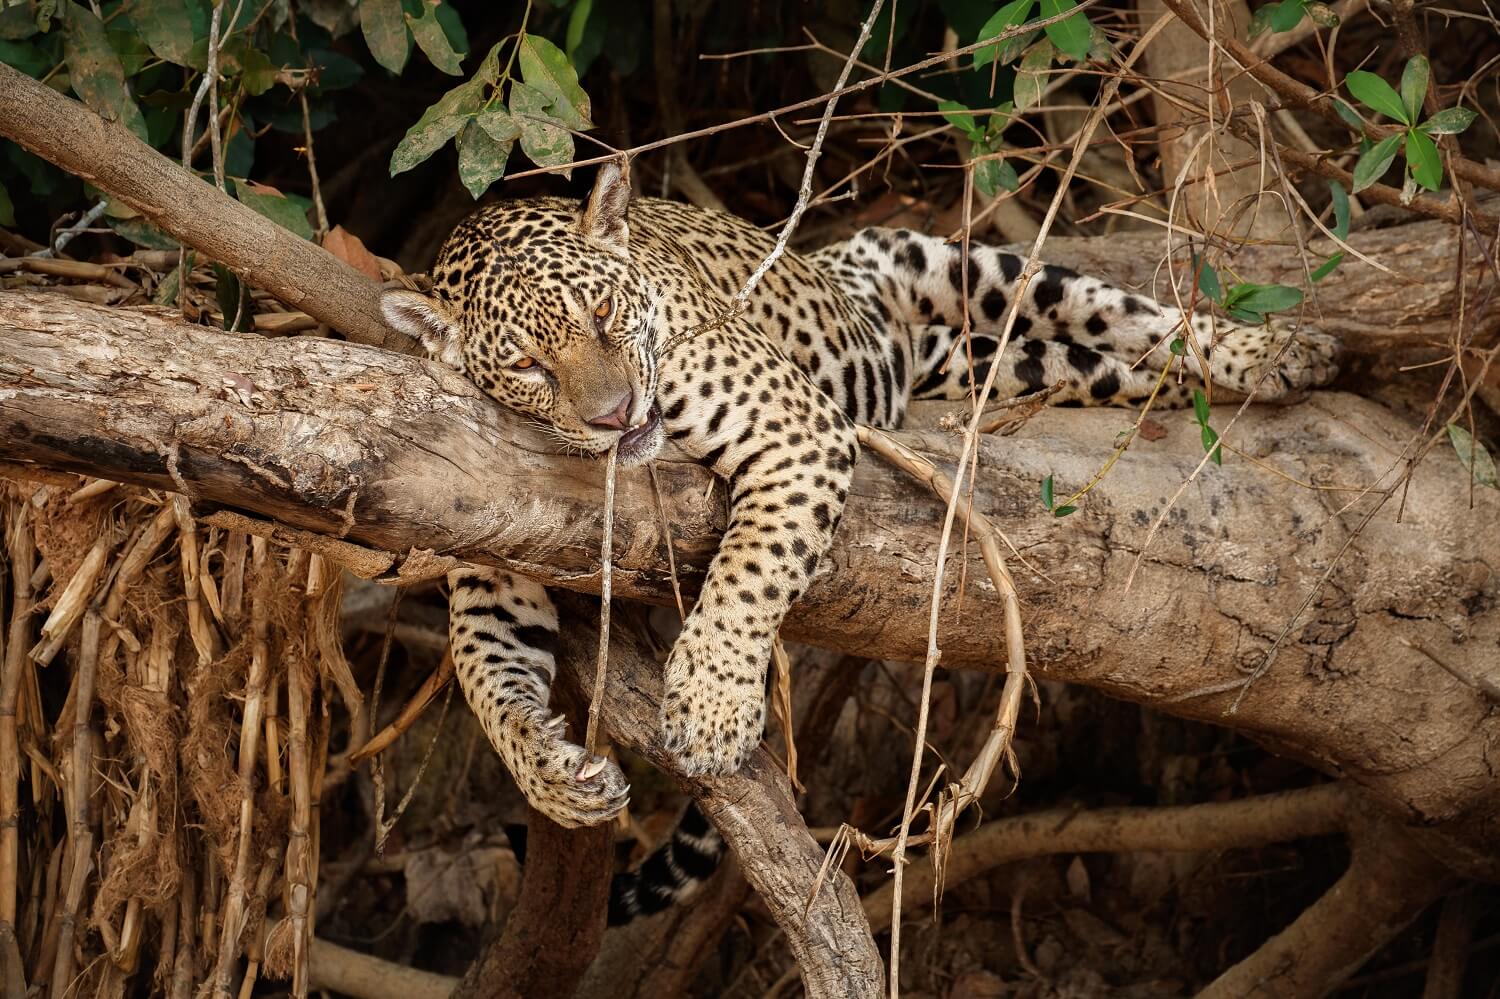 Leopard at the Belize Zoo